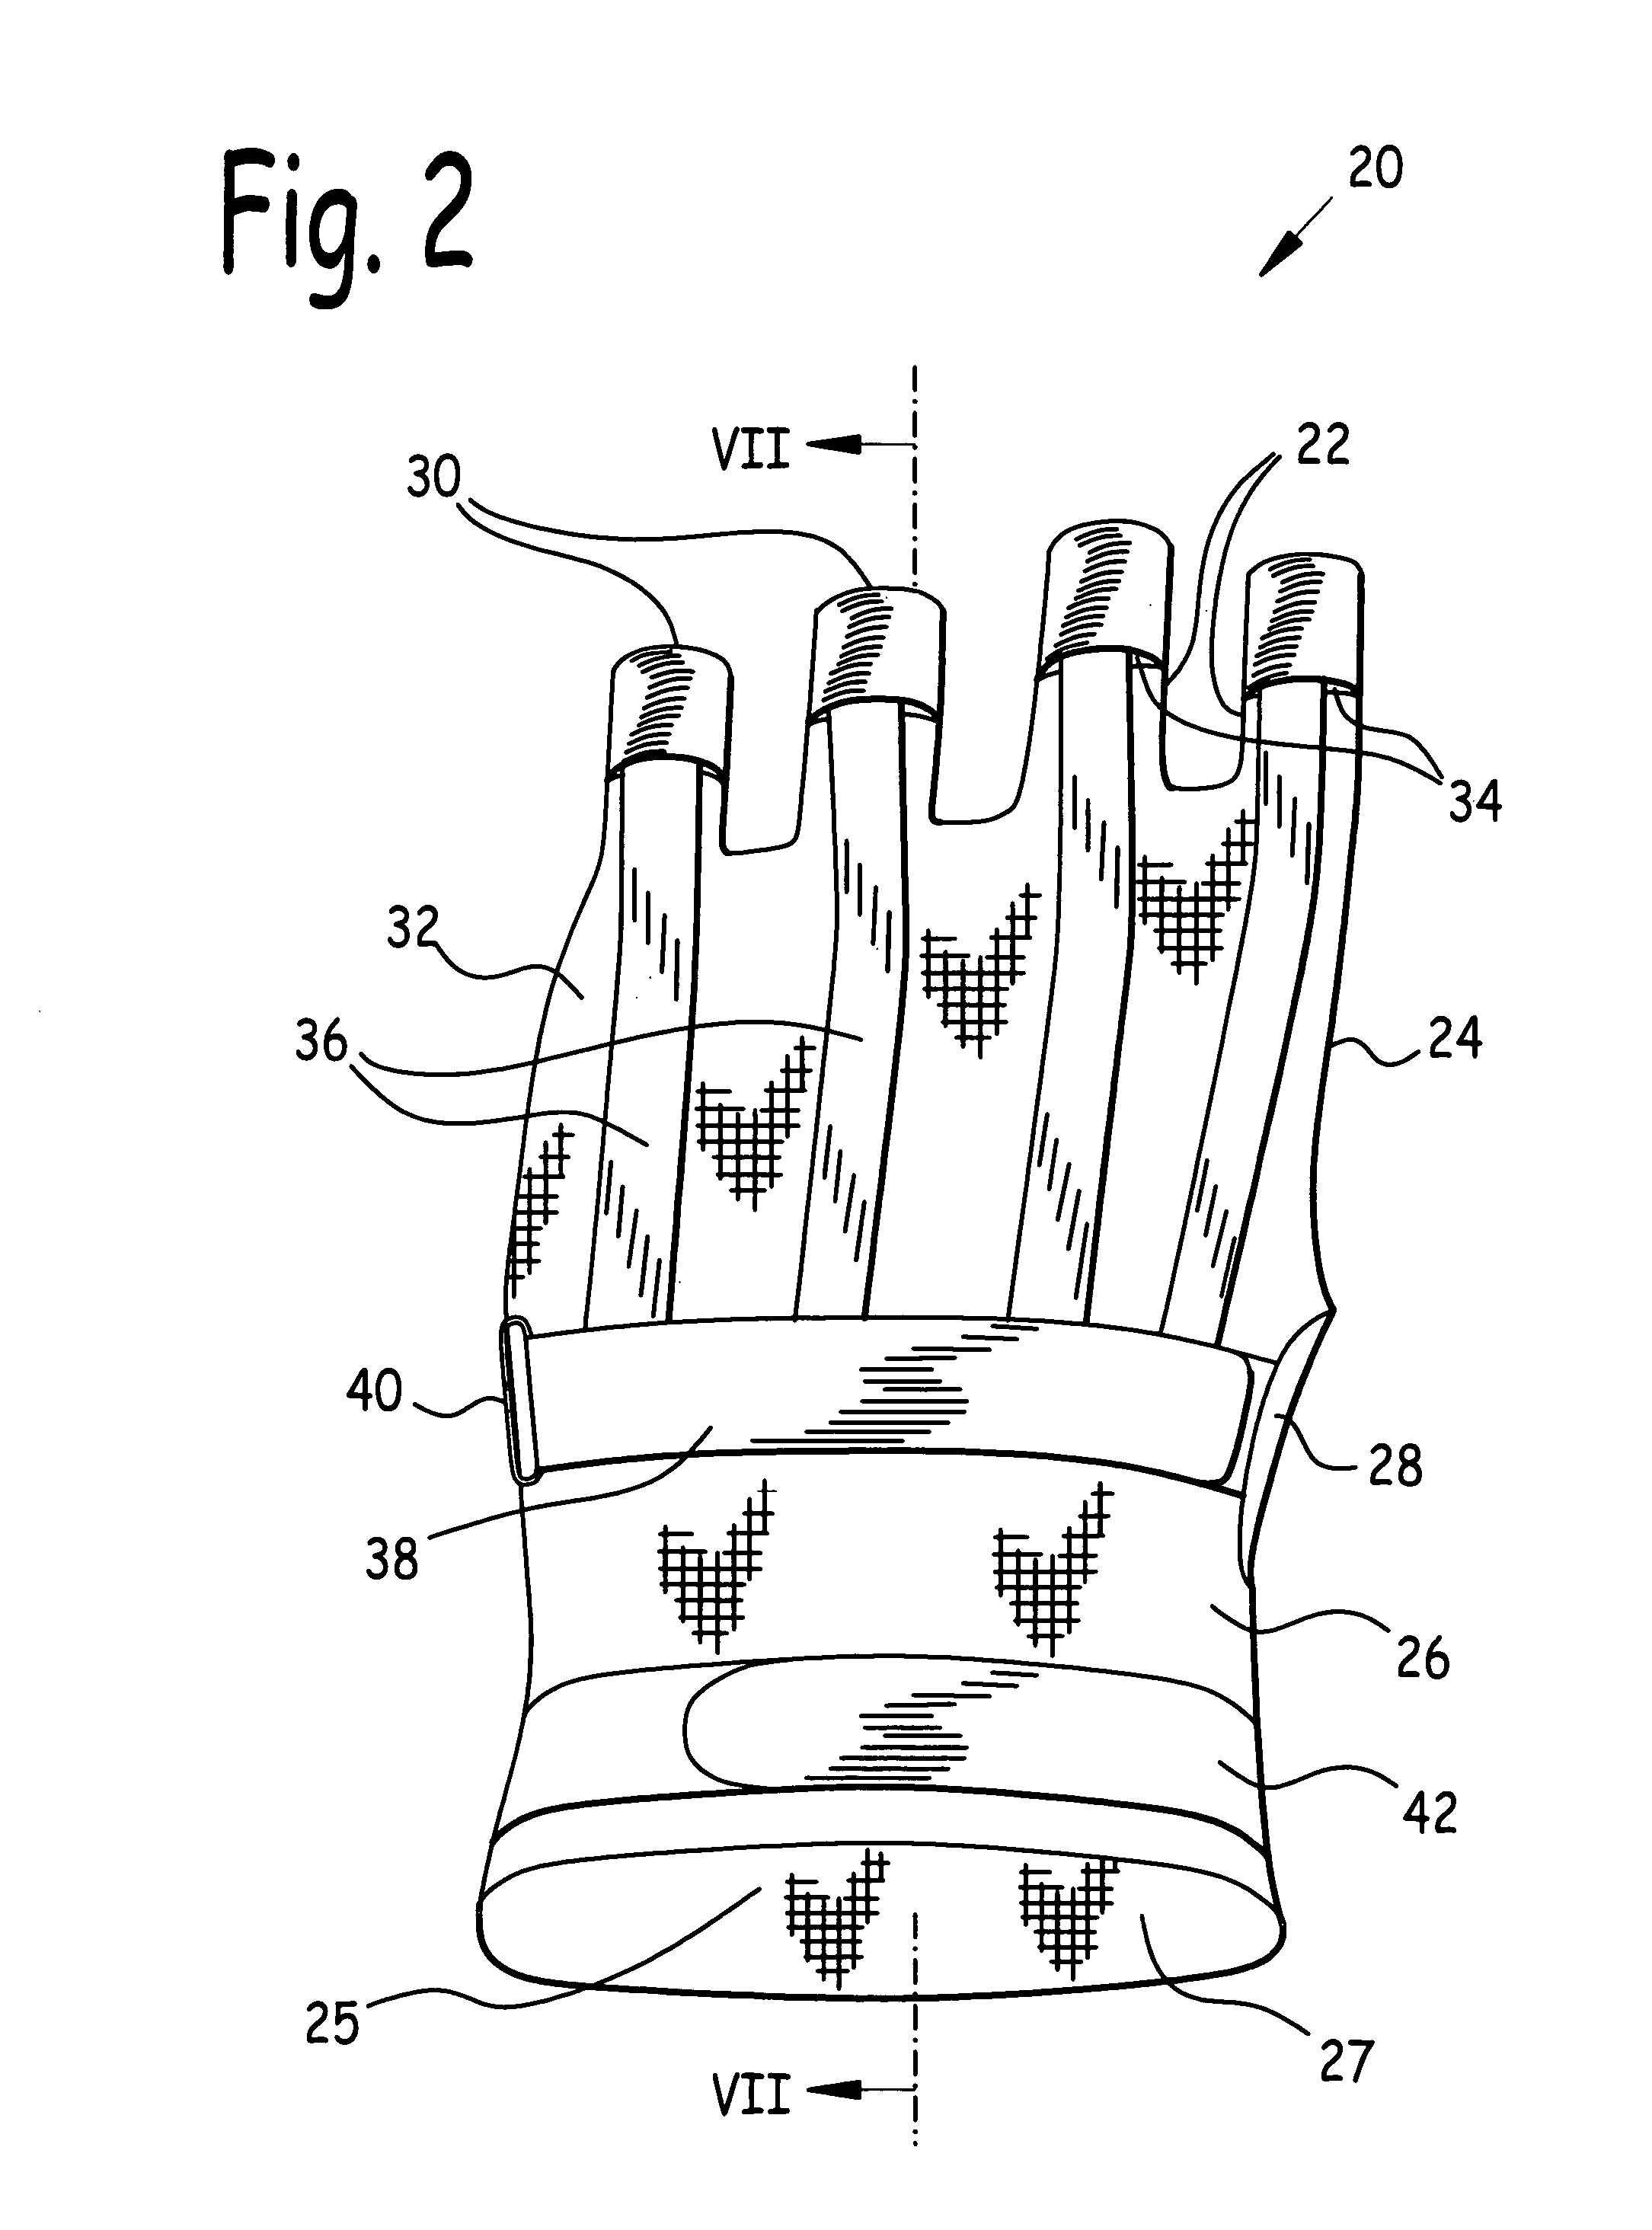 Exercise glove for intrinsic muscles and method of use